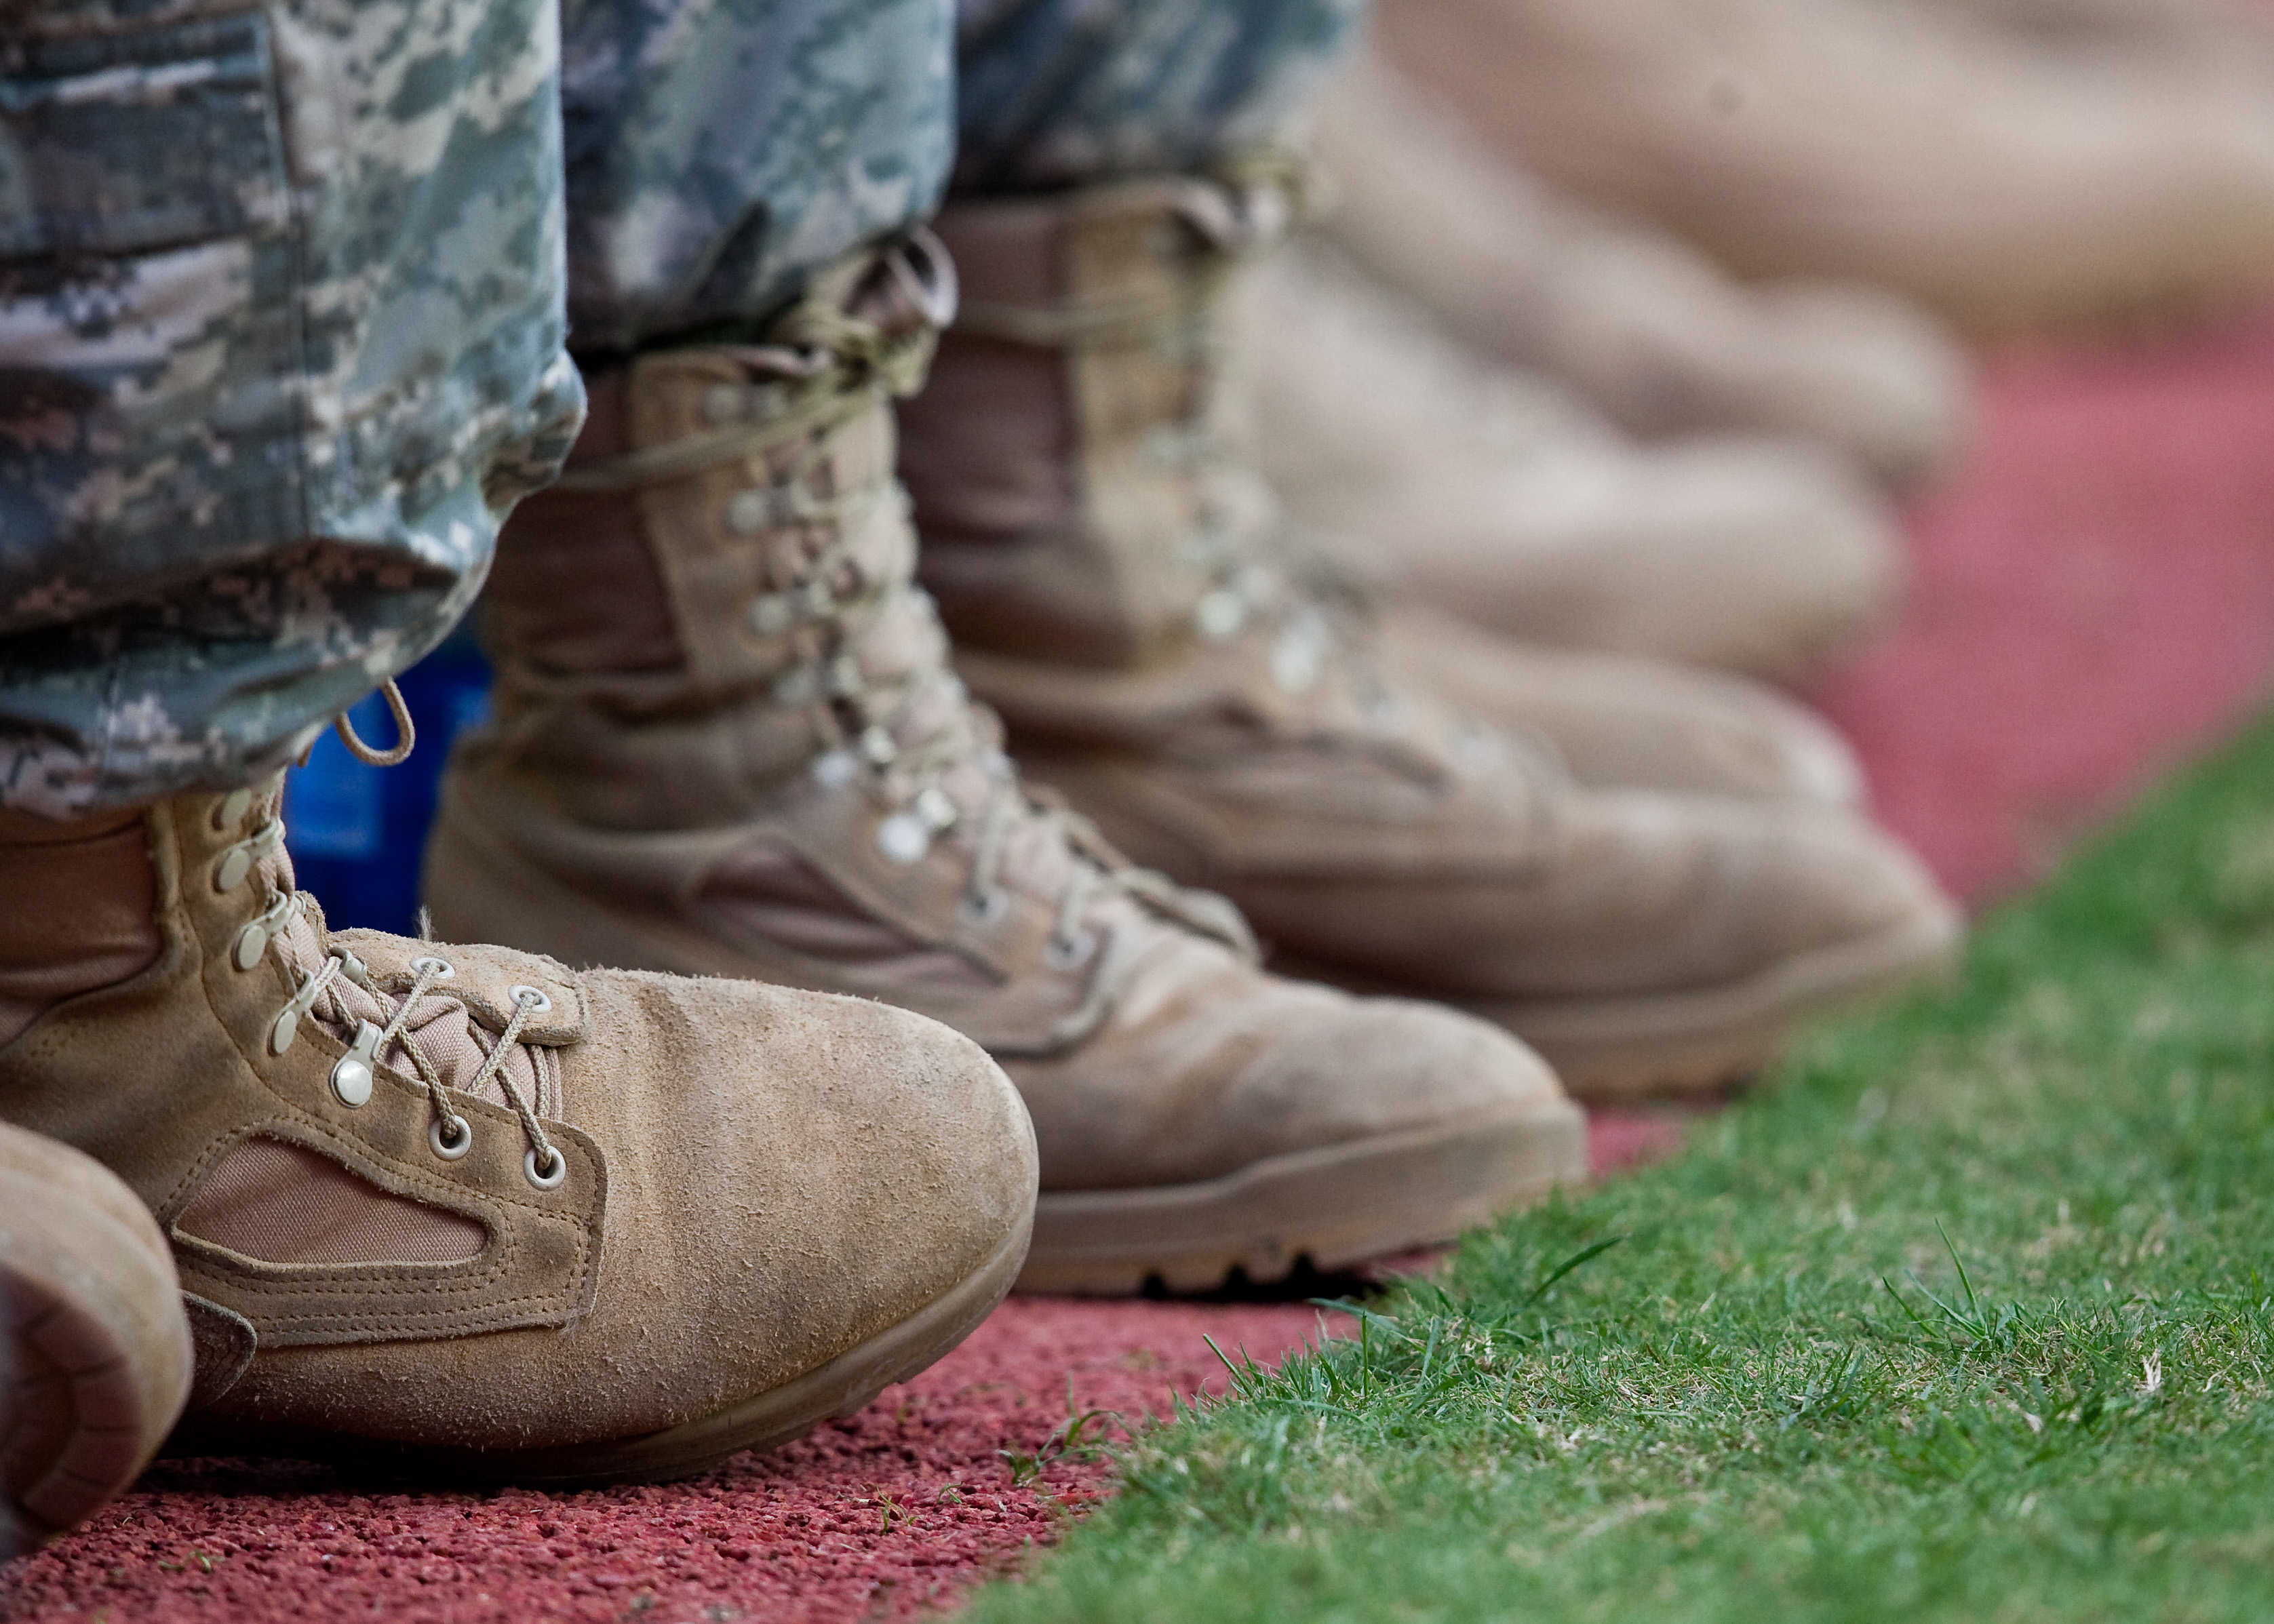 Members of the United States Army watched the game from the field during the San Diego Chargers 37-7 win over the Kansas City Chiefs at Arrowhead Stadium in Kansas City, Missouri. (Icon Sports Wire—Corbis via Getty Images)